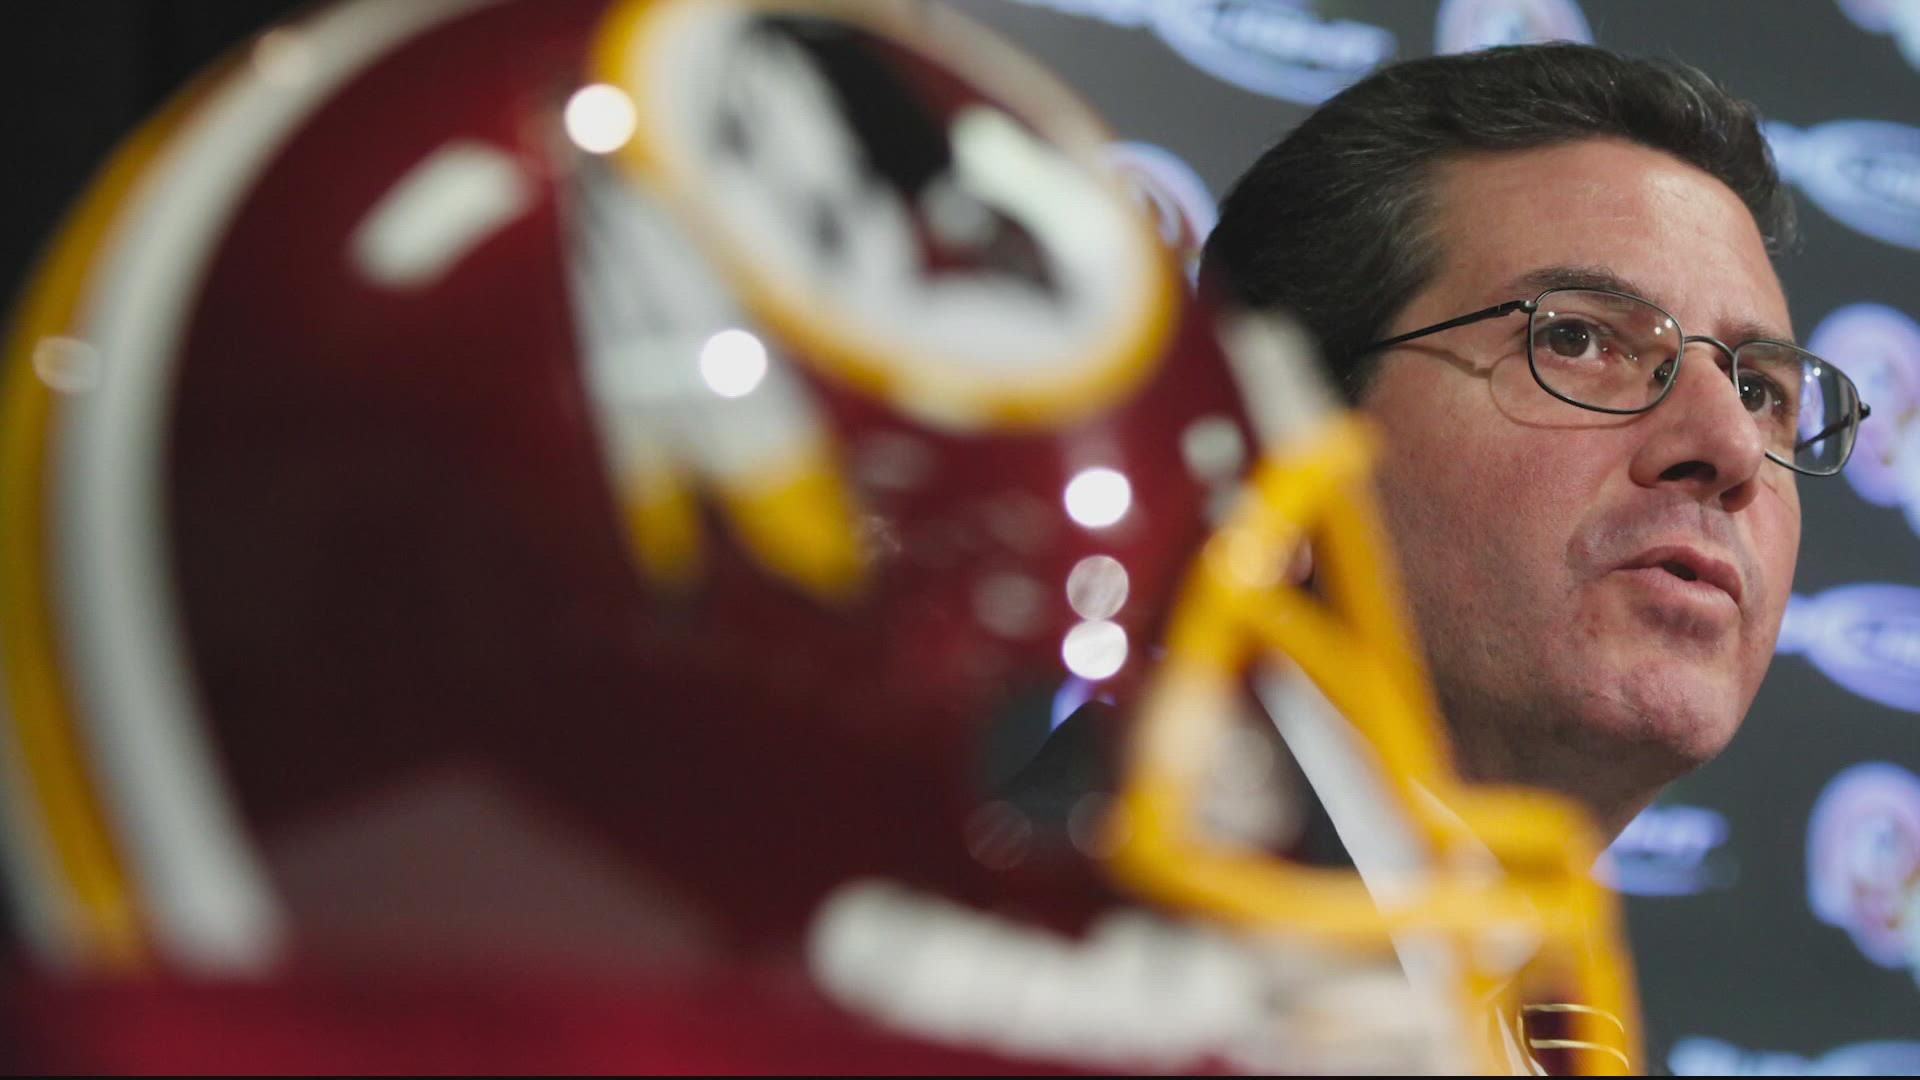 Dan Snyder has until 9 a.m. Monday to tell Congress if he will testify before the House Oversight Committee regarding workplace misconduct allegations.